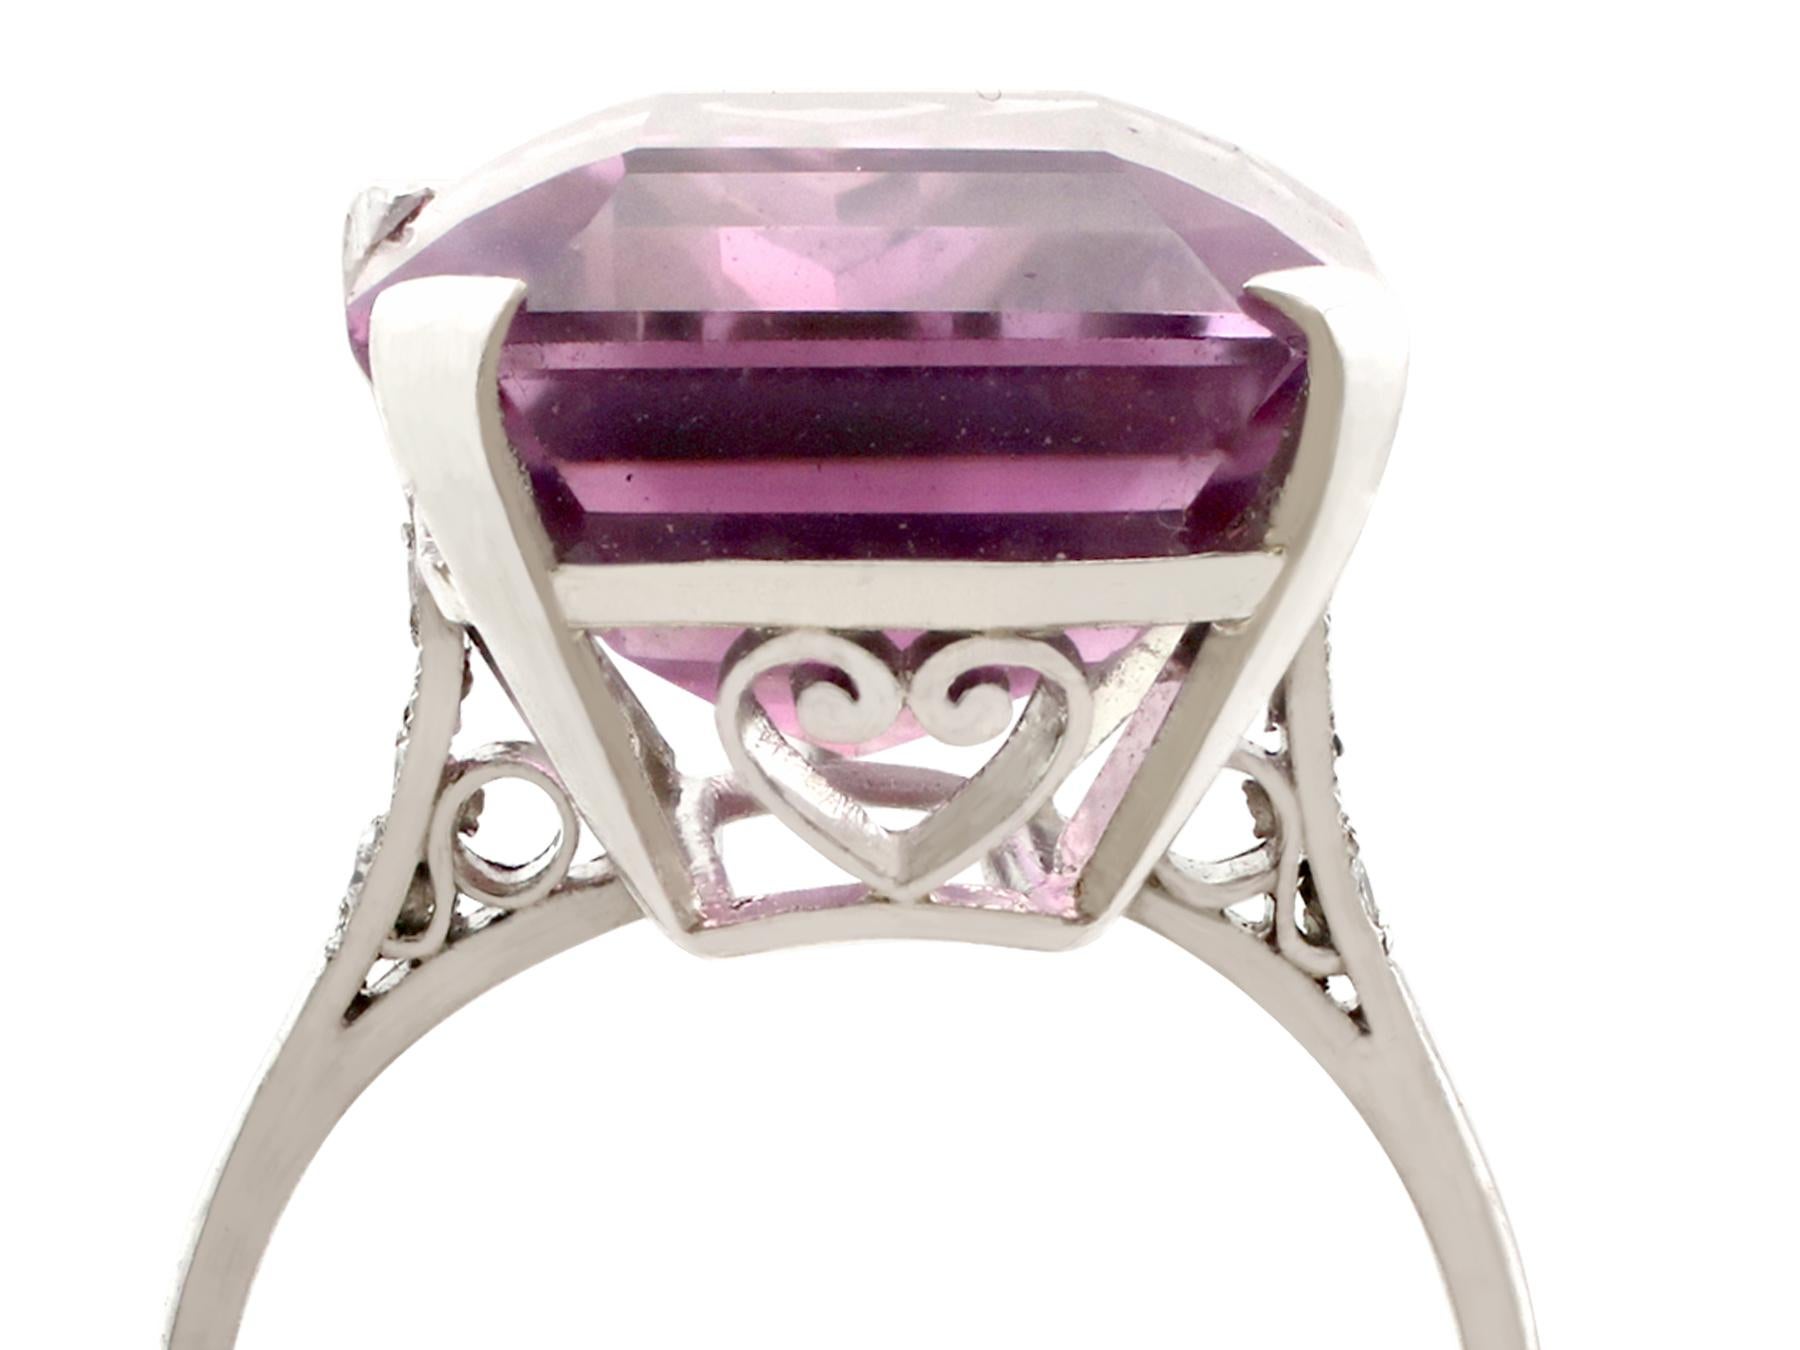 A stunning antique 13.23 carat amethyst and 0.08 carat diamond, platinum dress ring; part of our diverse antique jewellery and estate jewelry collections.

This stunning, fine and impressive antique amethyst ring has been crafted in platinum.

The